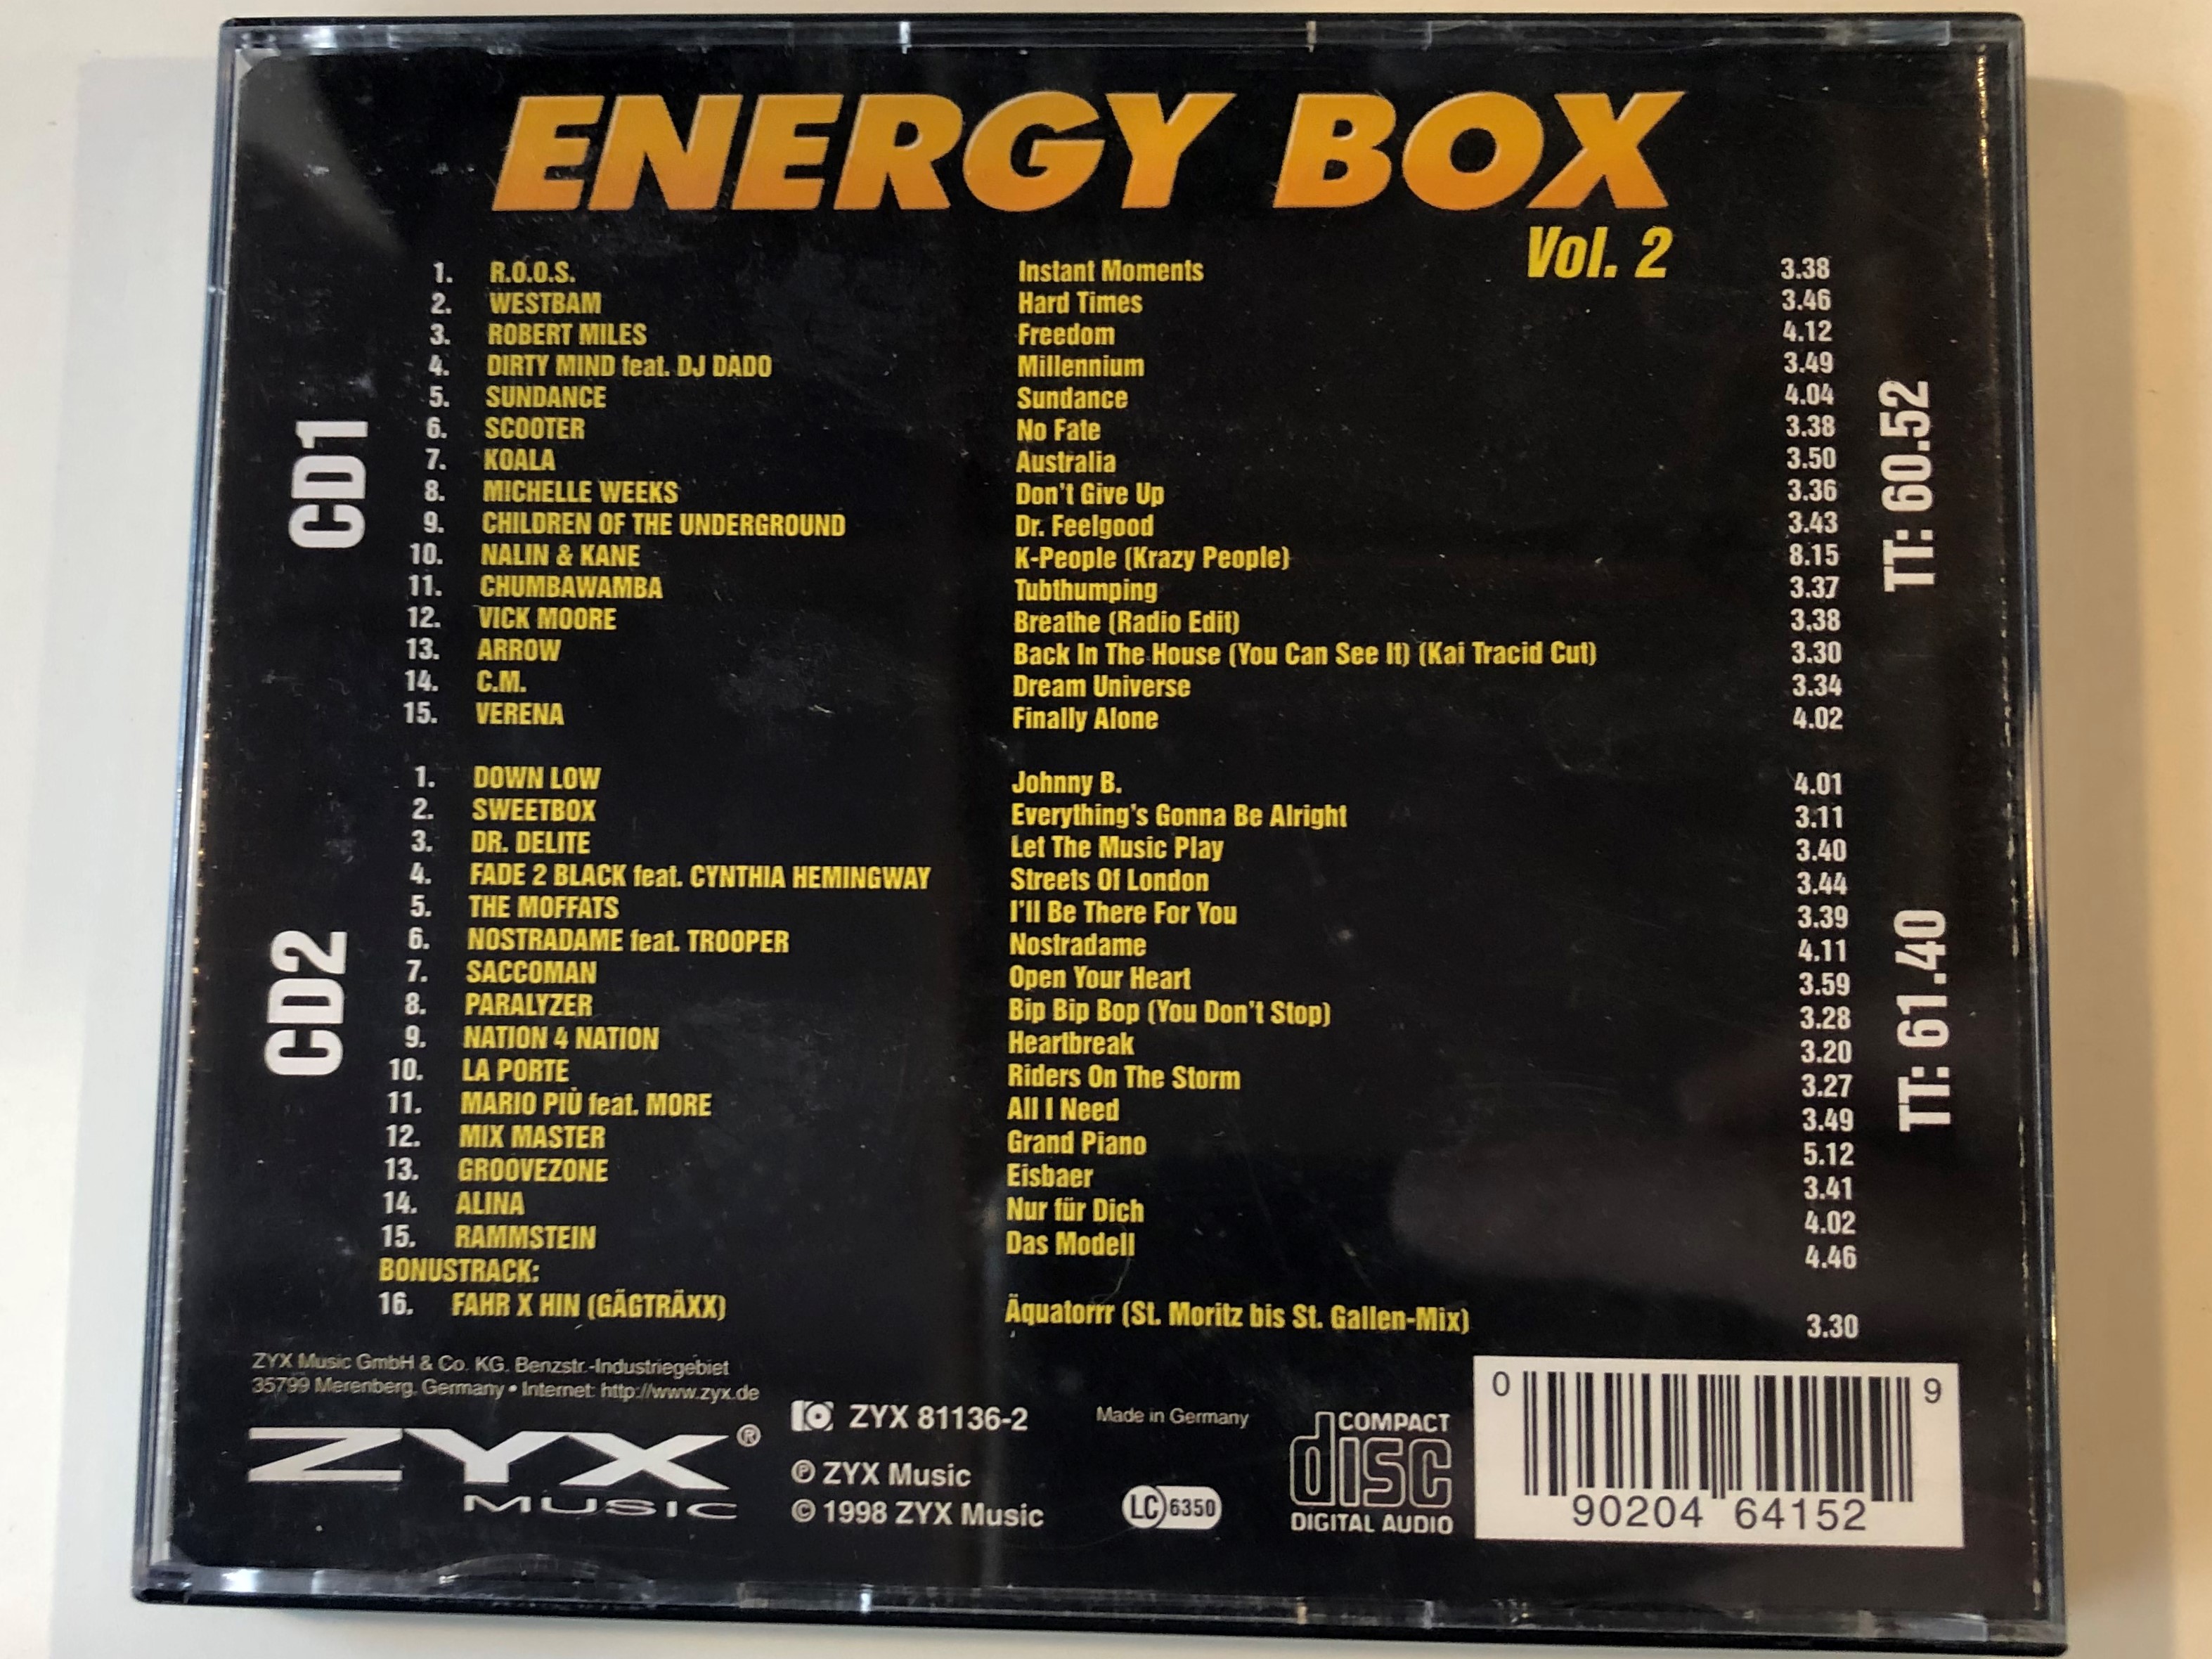 energy-box-vol.-2-nalin-kane-r.o.o.s.-down-low-dirty-mind-feat.-dj-dado-scooter-and-more-zyx-music-2x-audio-cd-1998-zyx-81136-2-2-.jpg